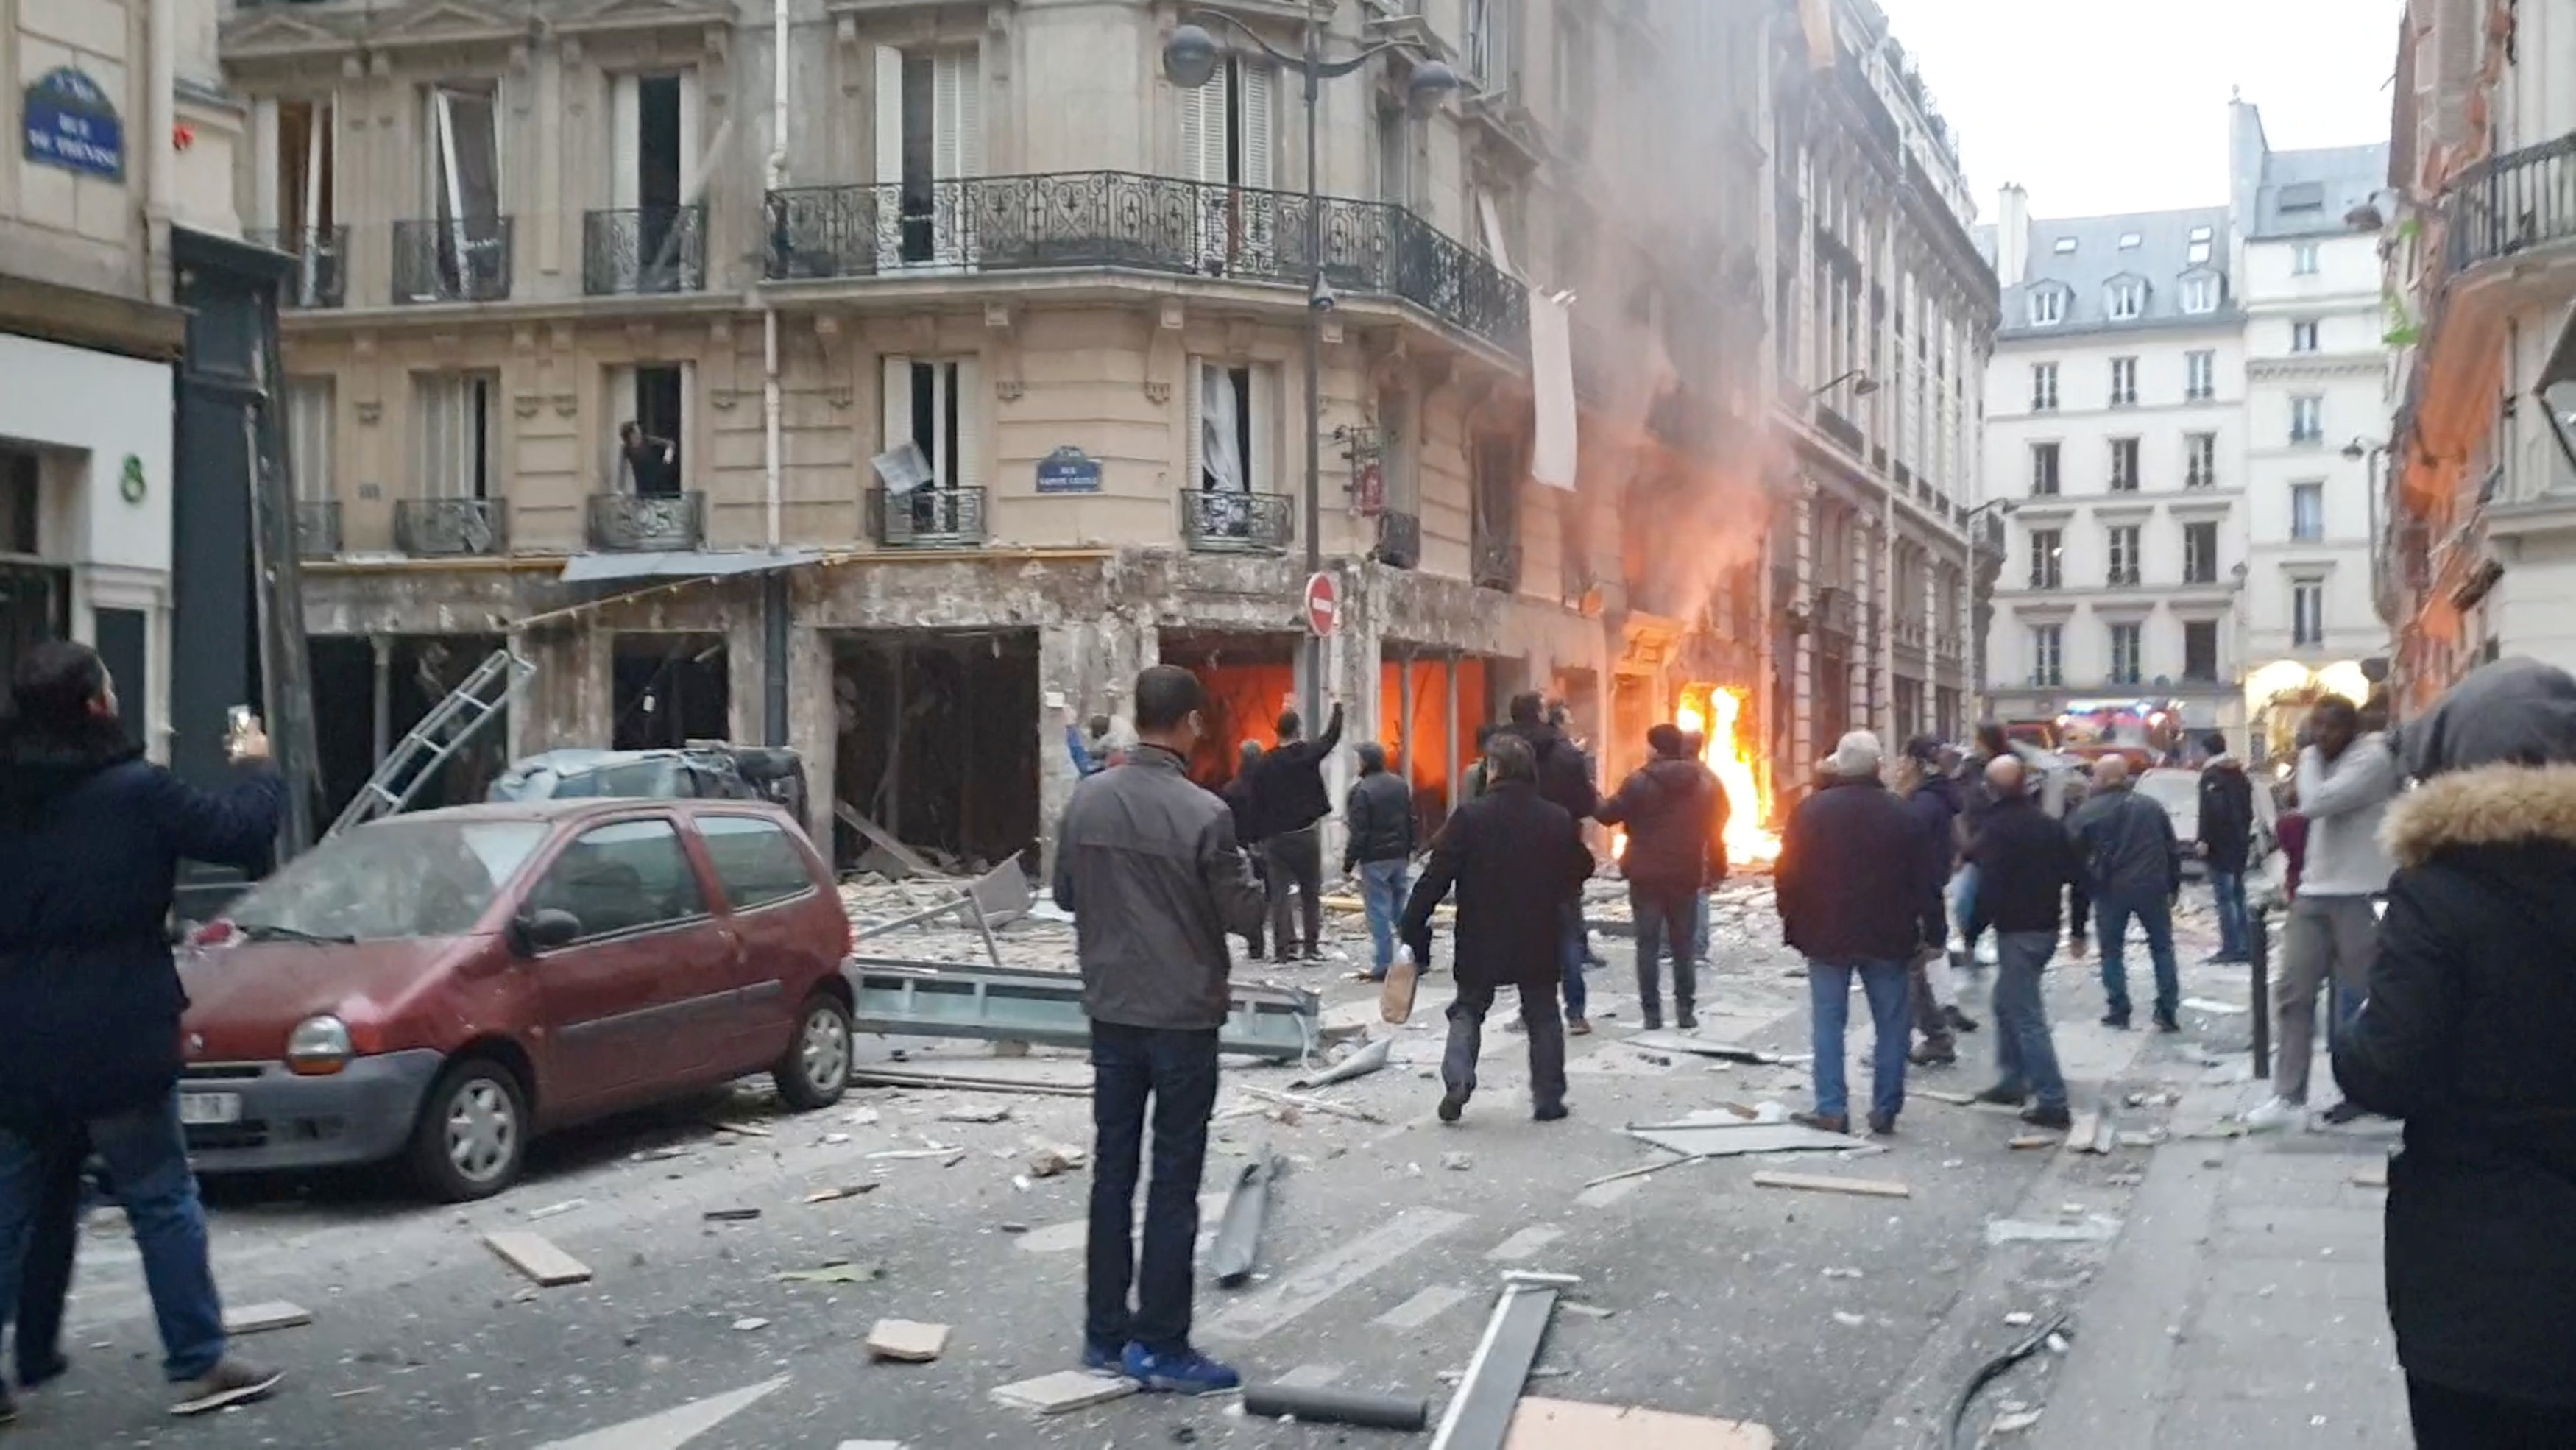 Fire burns at the site of an explosion at a bakery shop in Paris, France January 12, 2019, in this still image obtained from a social media video. REUTERS 